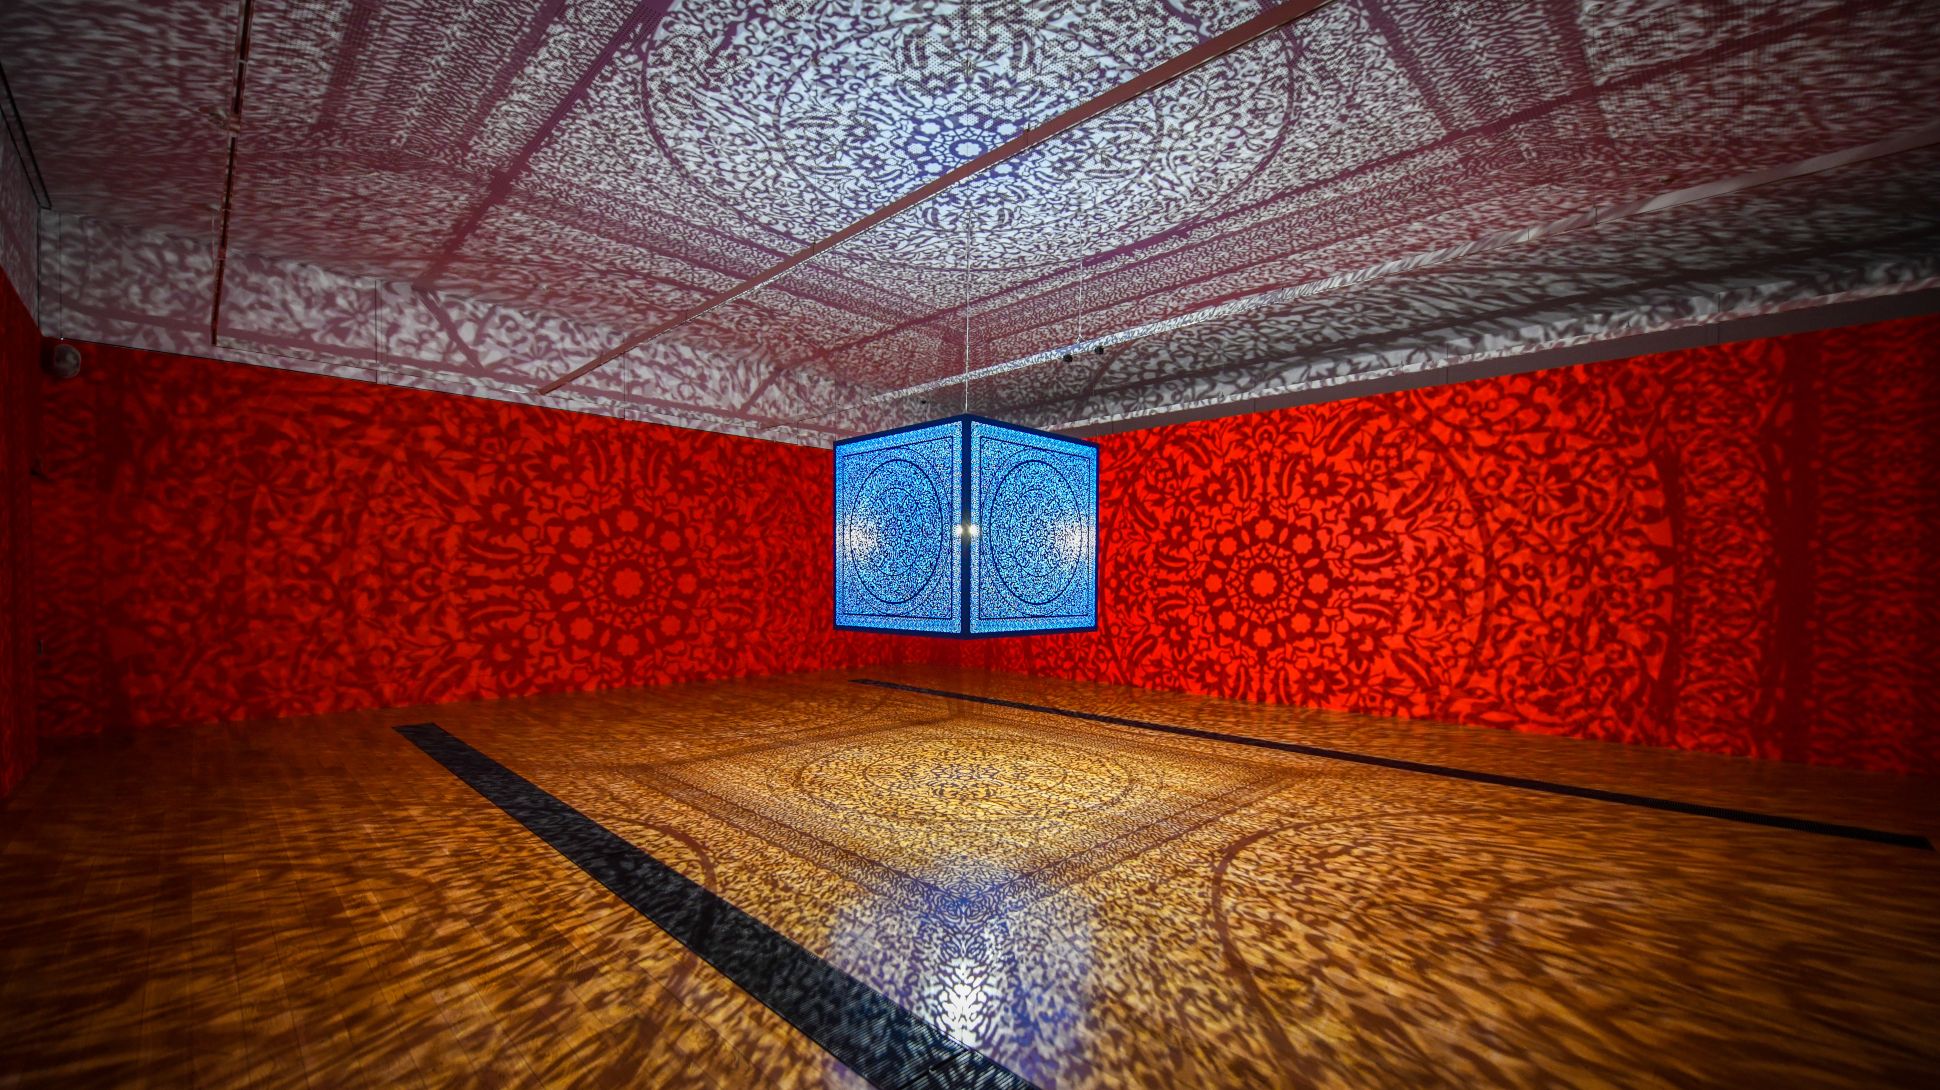 Wide shot: a blue glowing cube hangs suspended in a gallery, throwing intricate shadows onto the orange walls and wooden floor